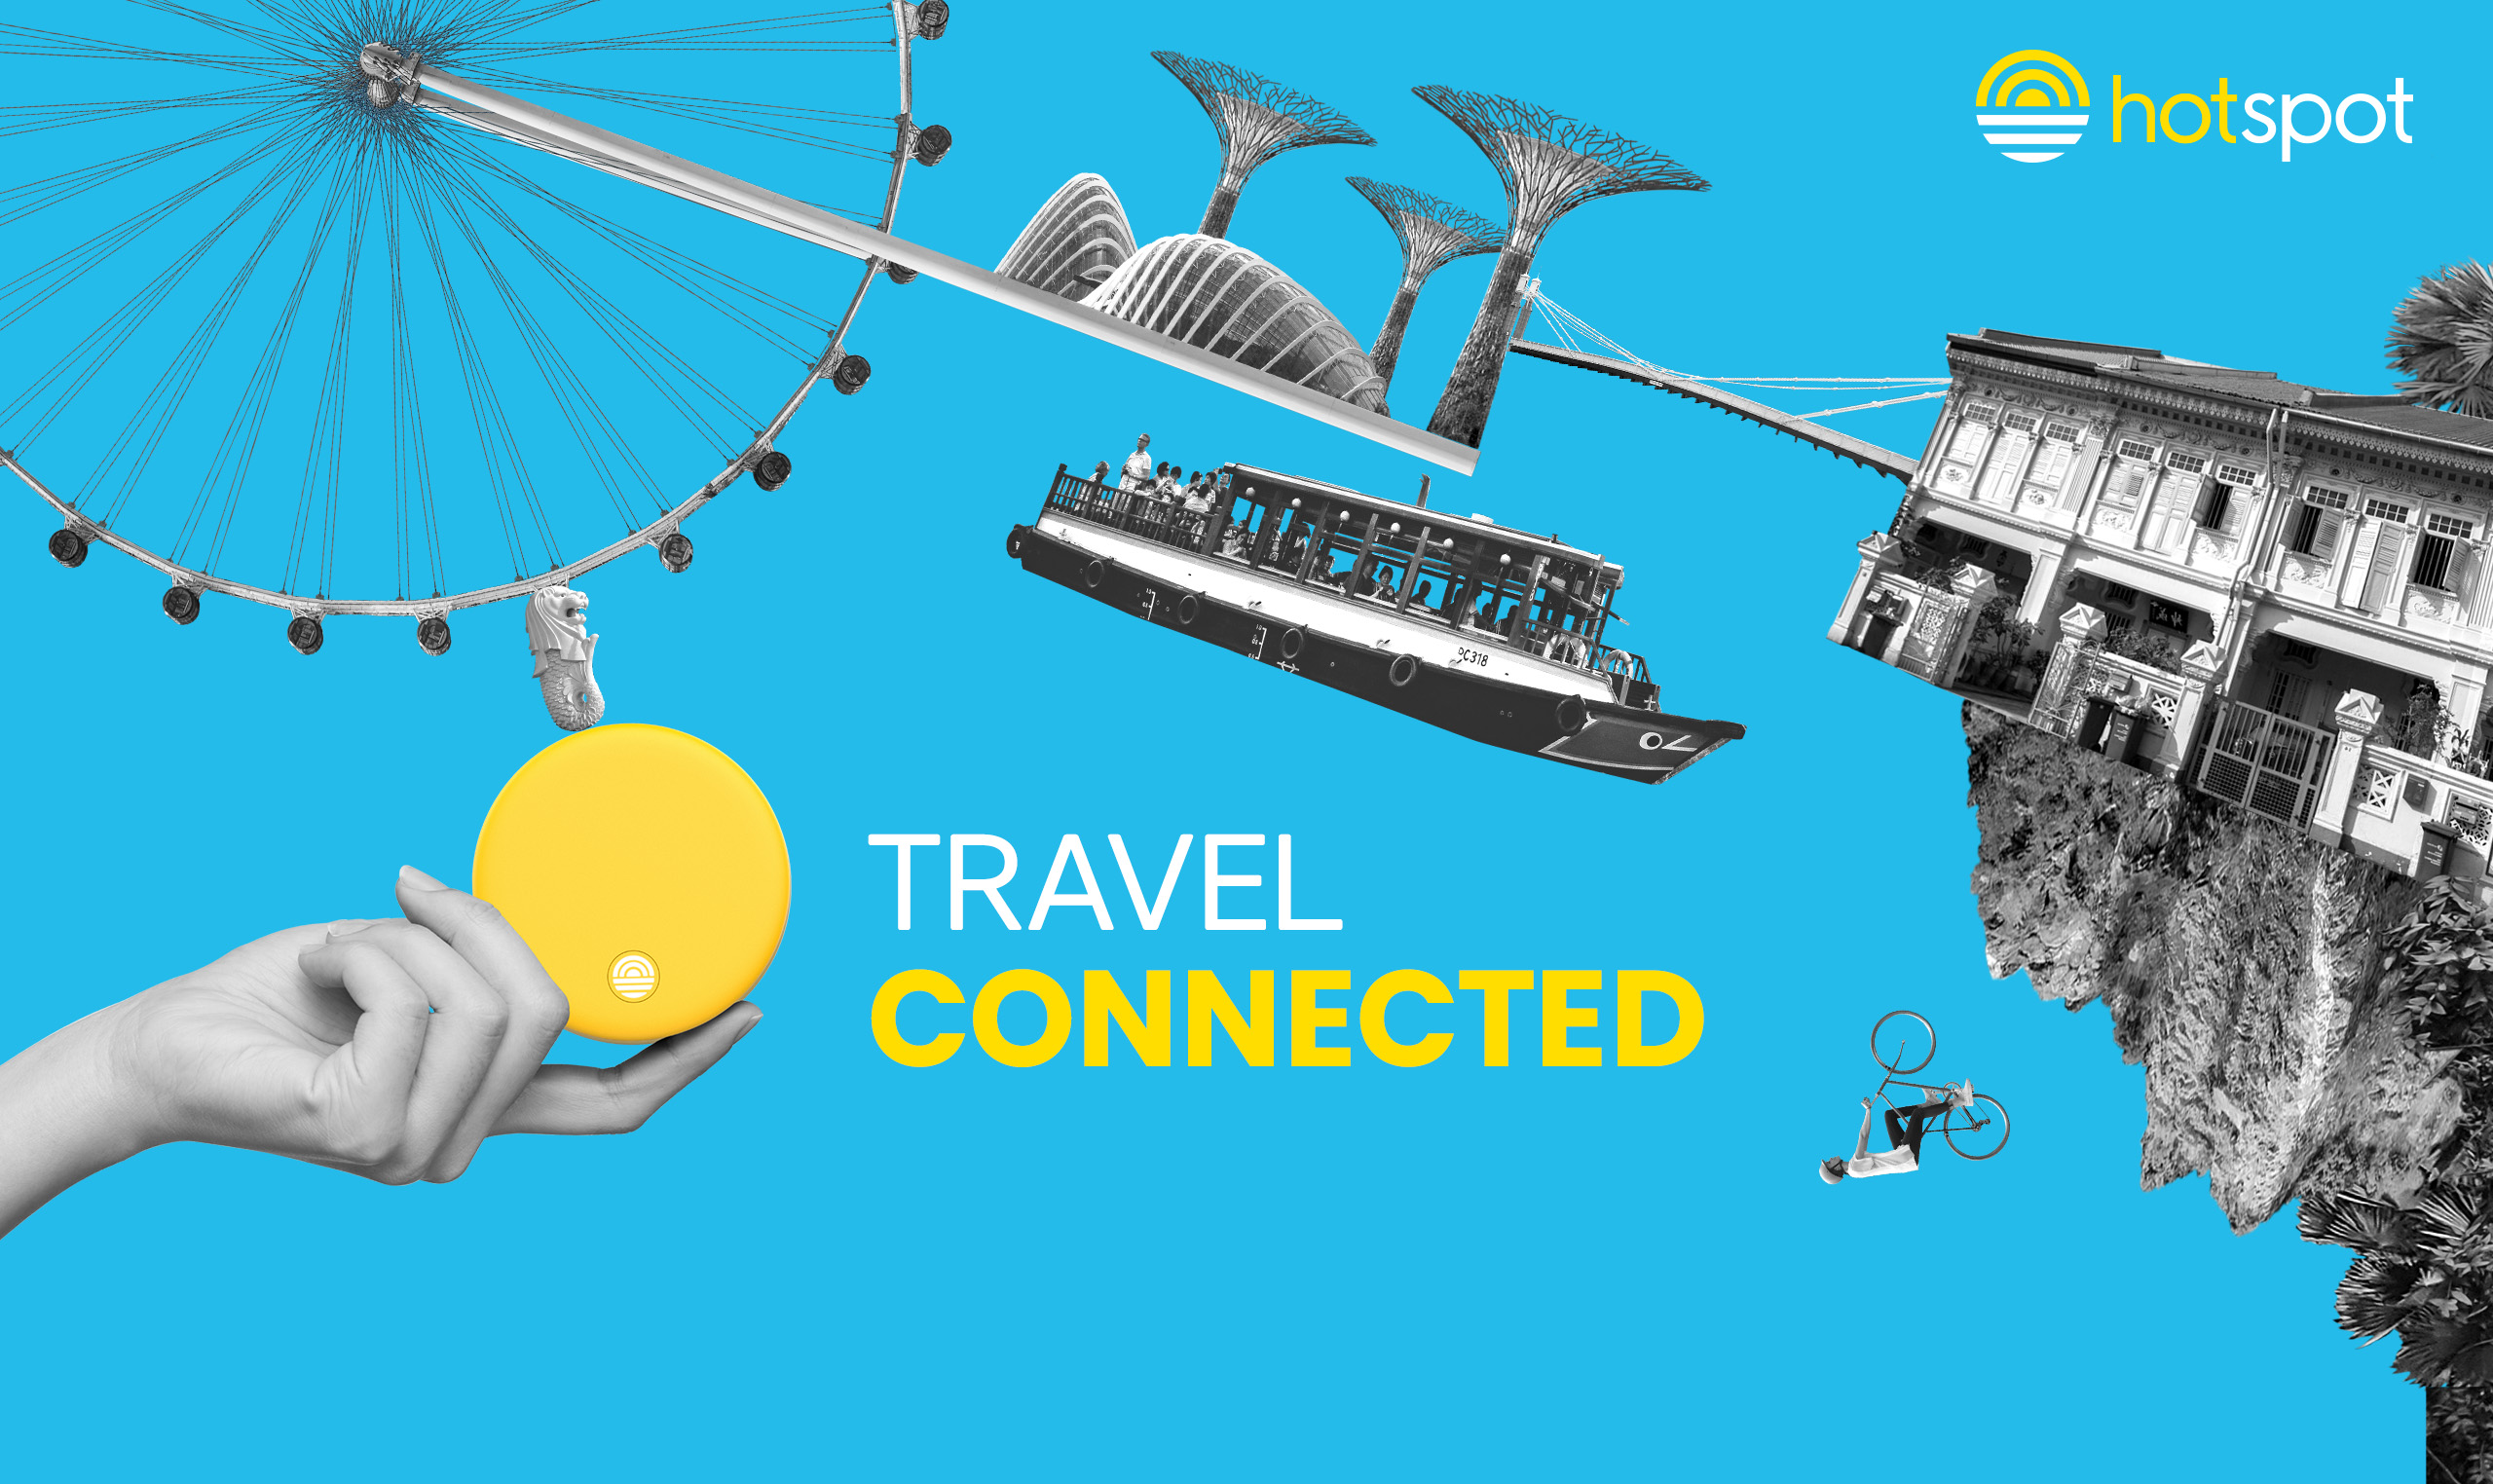 Travel connected with hotspot!